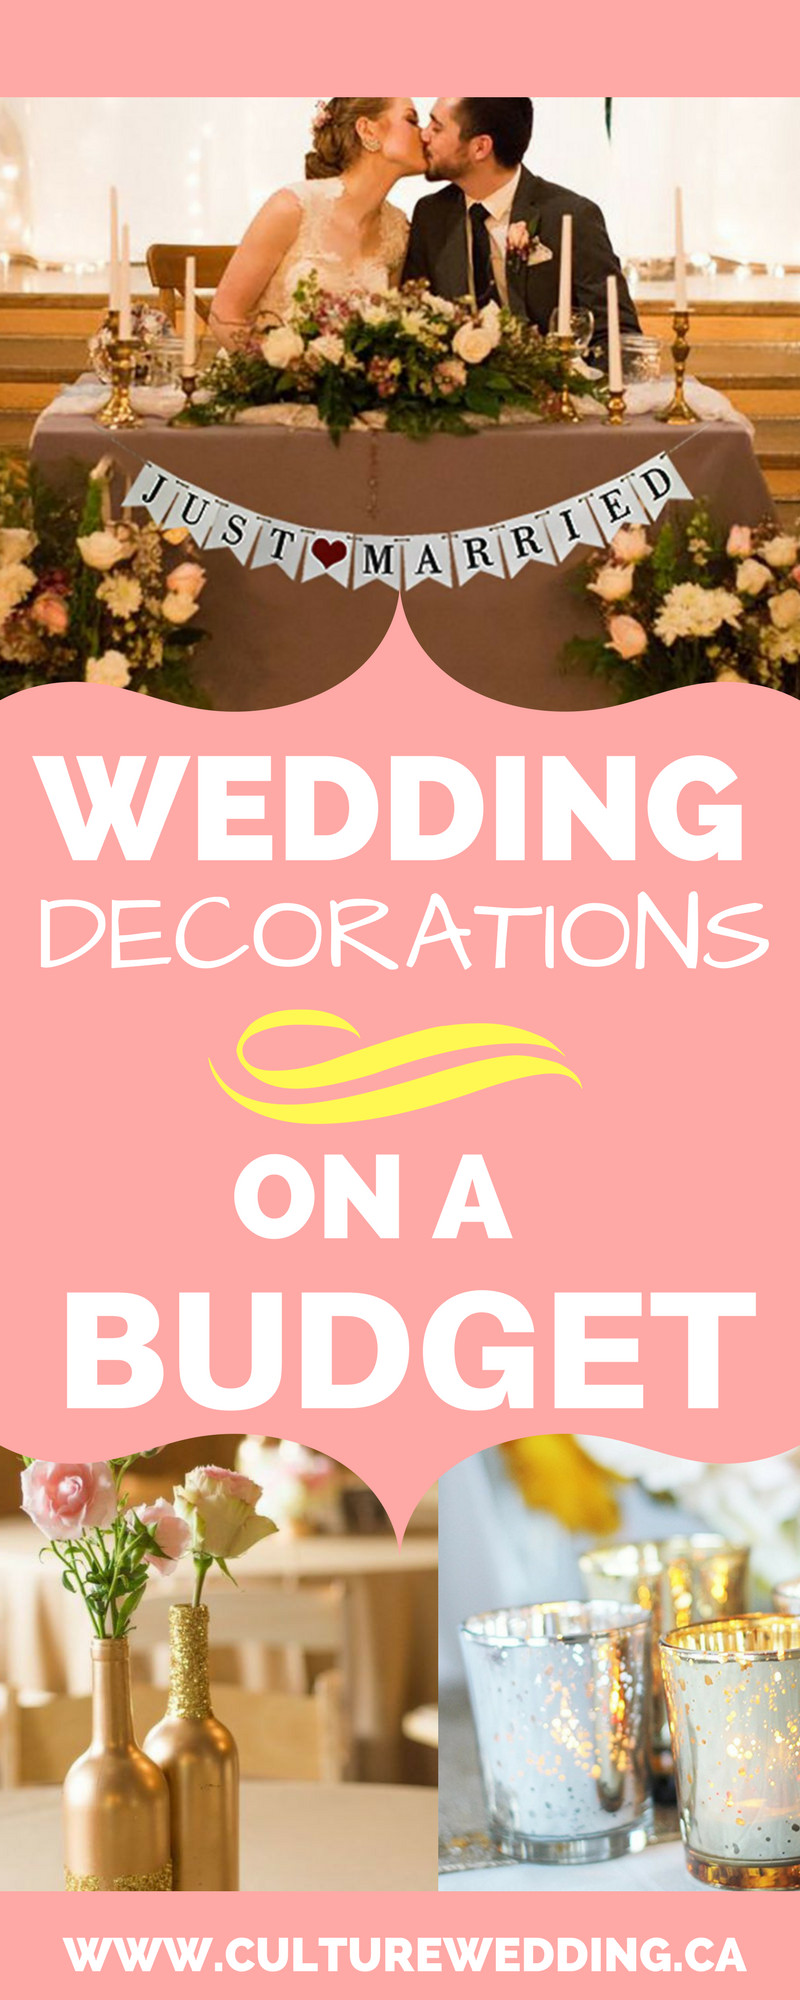 DIY Wedding Decor On A Budget
 How to Wedding Decorations on a Bud Get them now